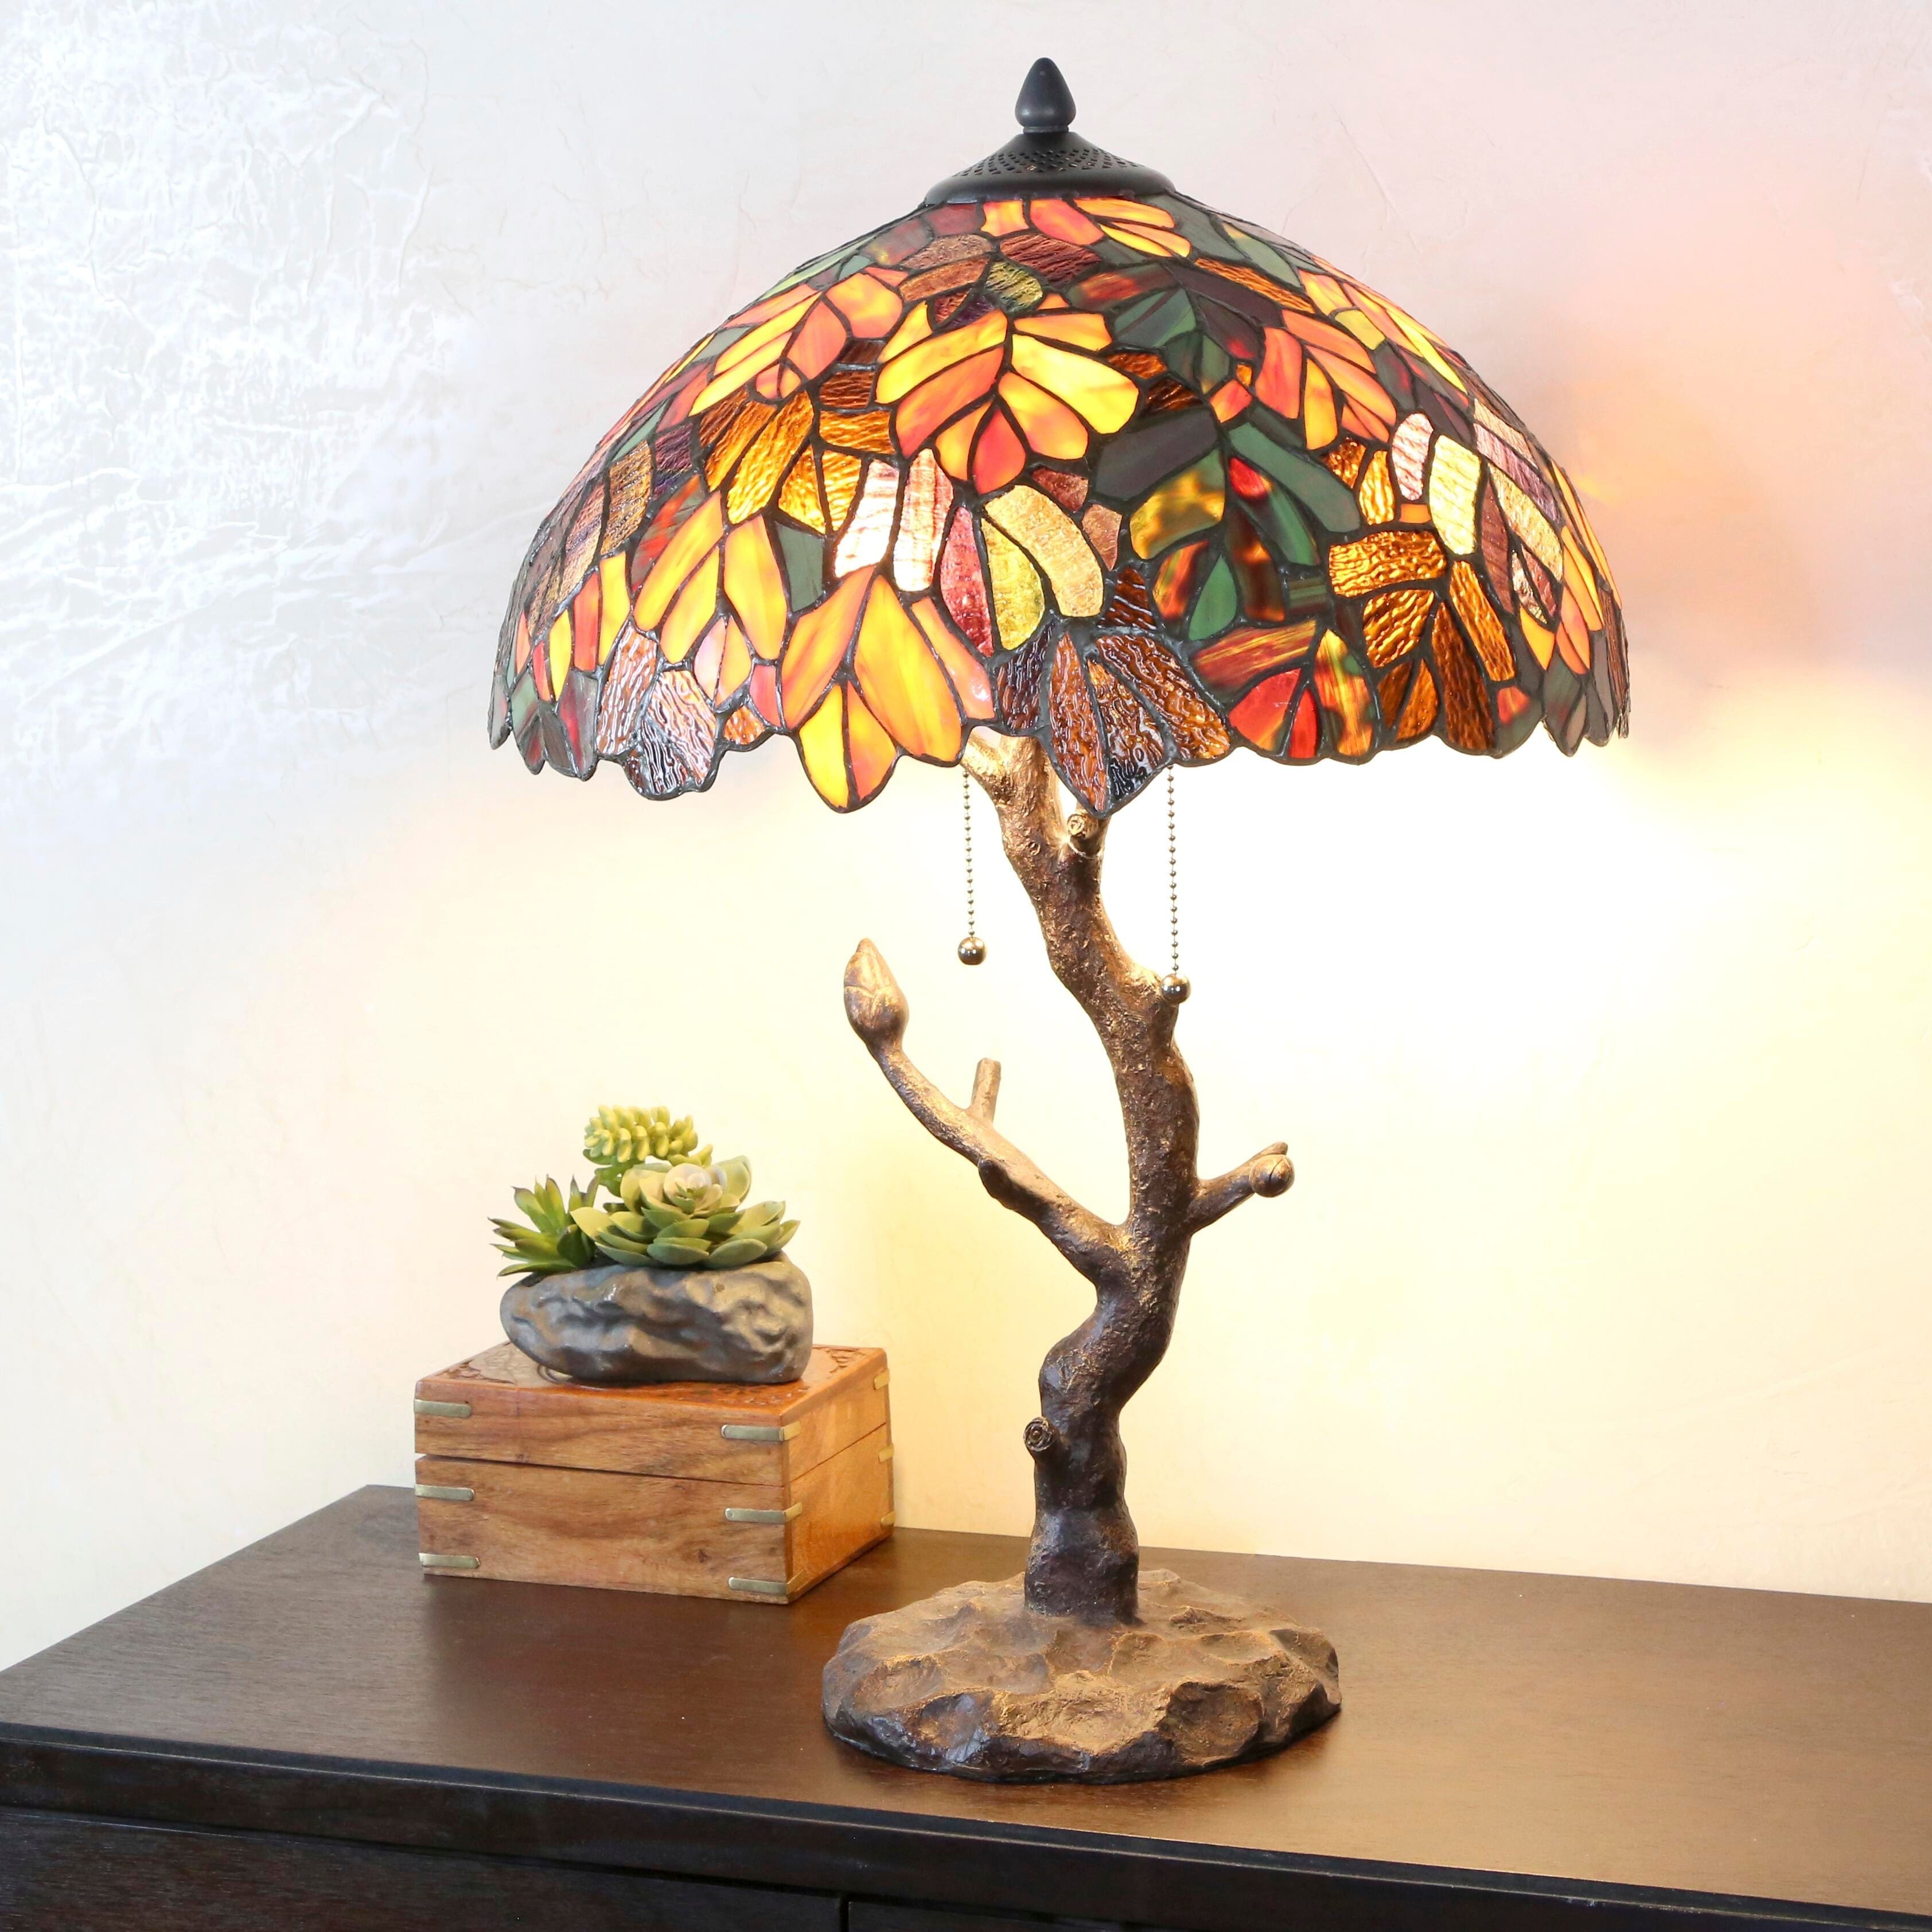 24.5 in. Multi-Colored Indoor Table Lamp with Stained Glass Tree Trunk Base